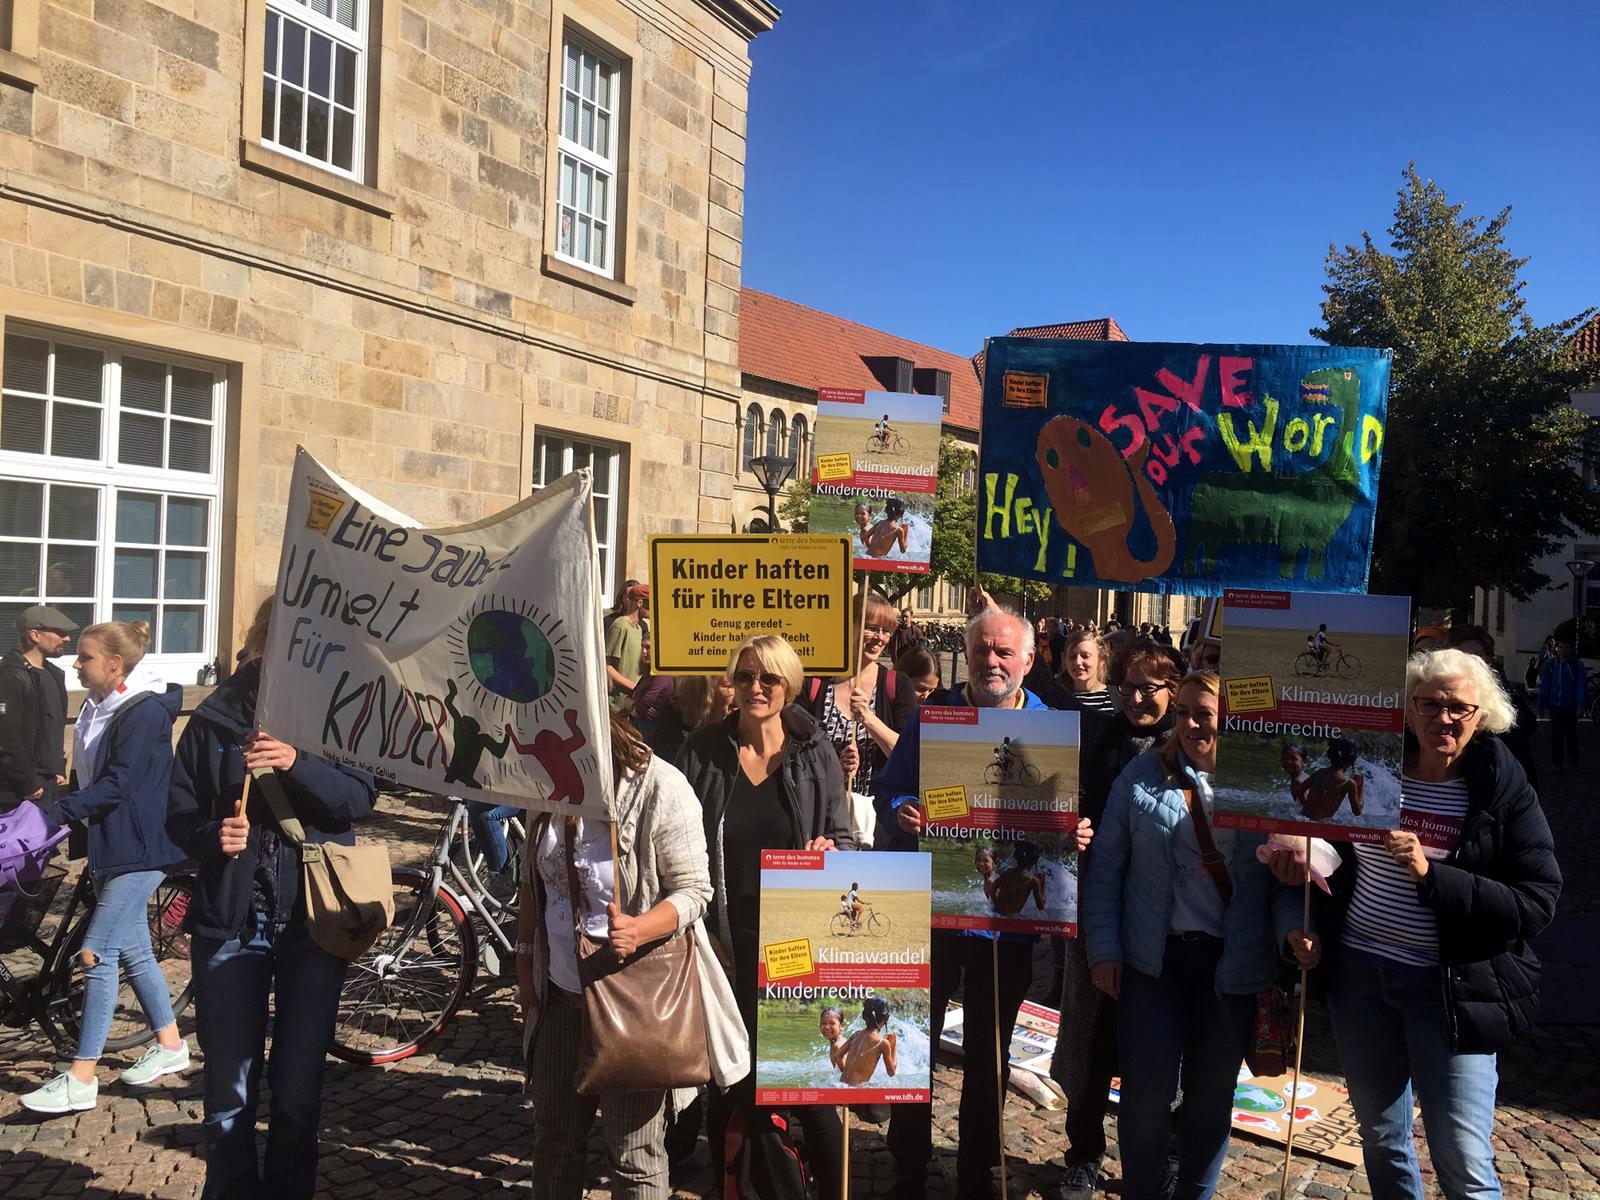 Activists from the tdh head office in Osnabrück joined the march as well.